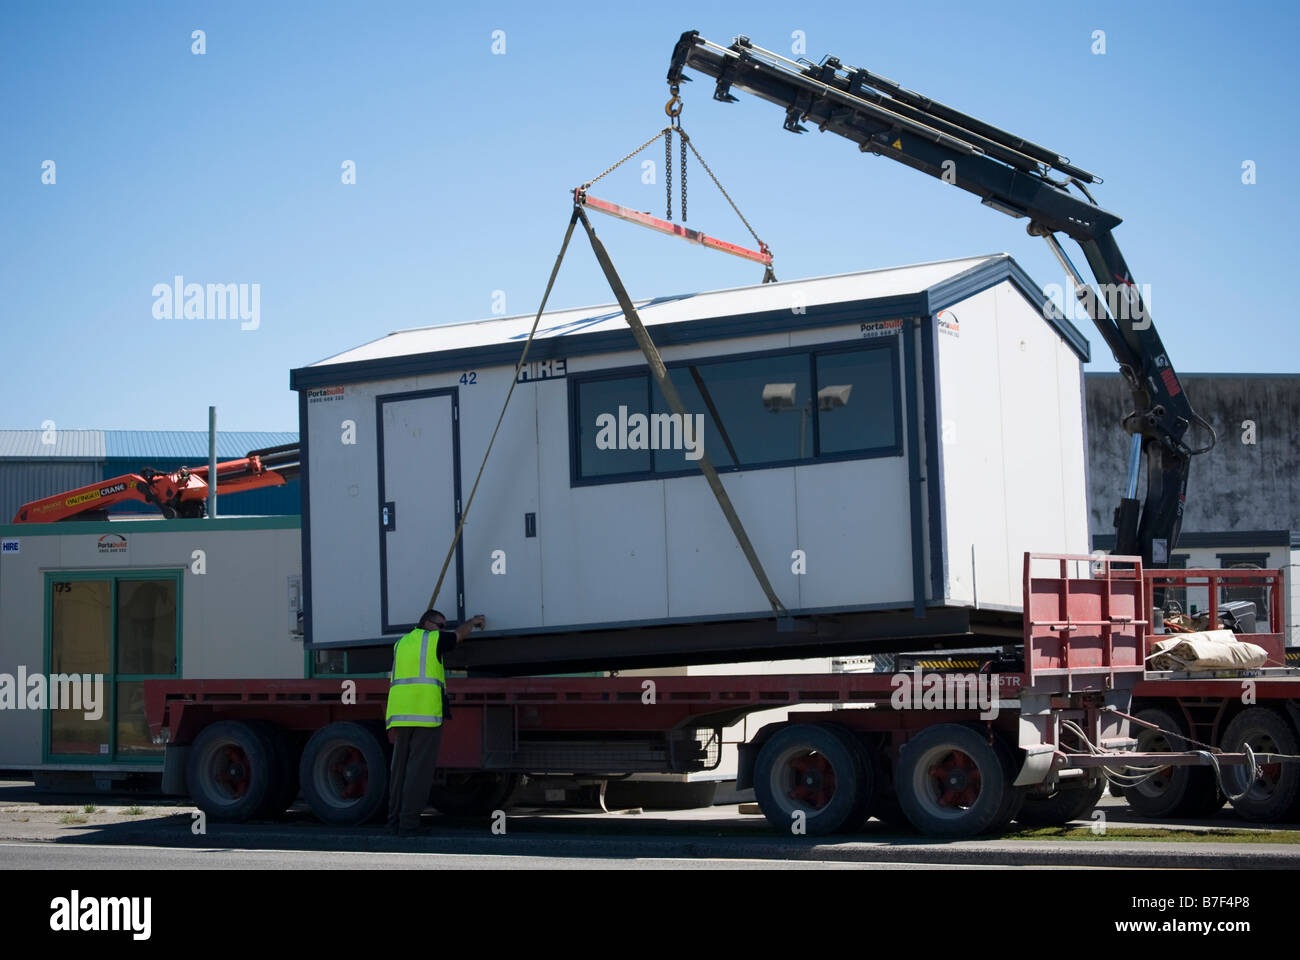 Portable Building being laded on truck, Blenheim Road, Sockburn, Christchurch, Canterbury, New Zealand Stock Photo